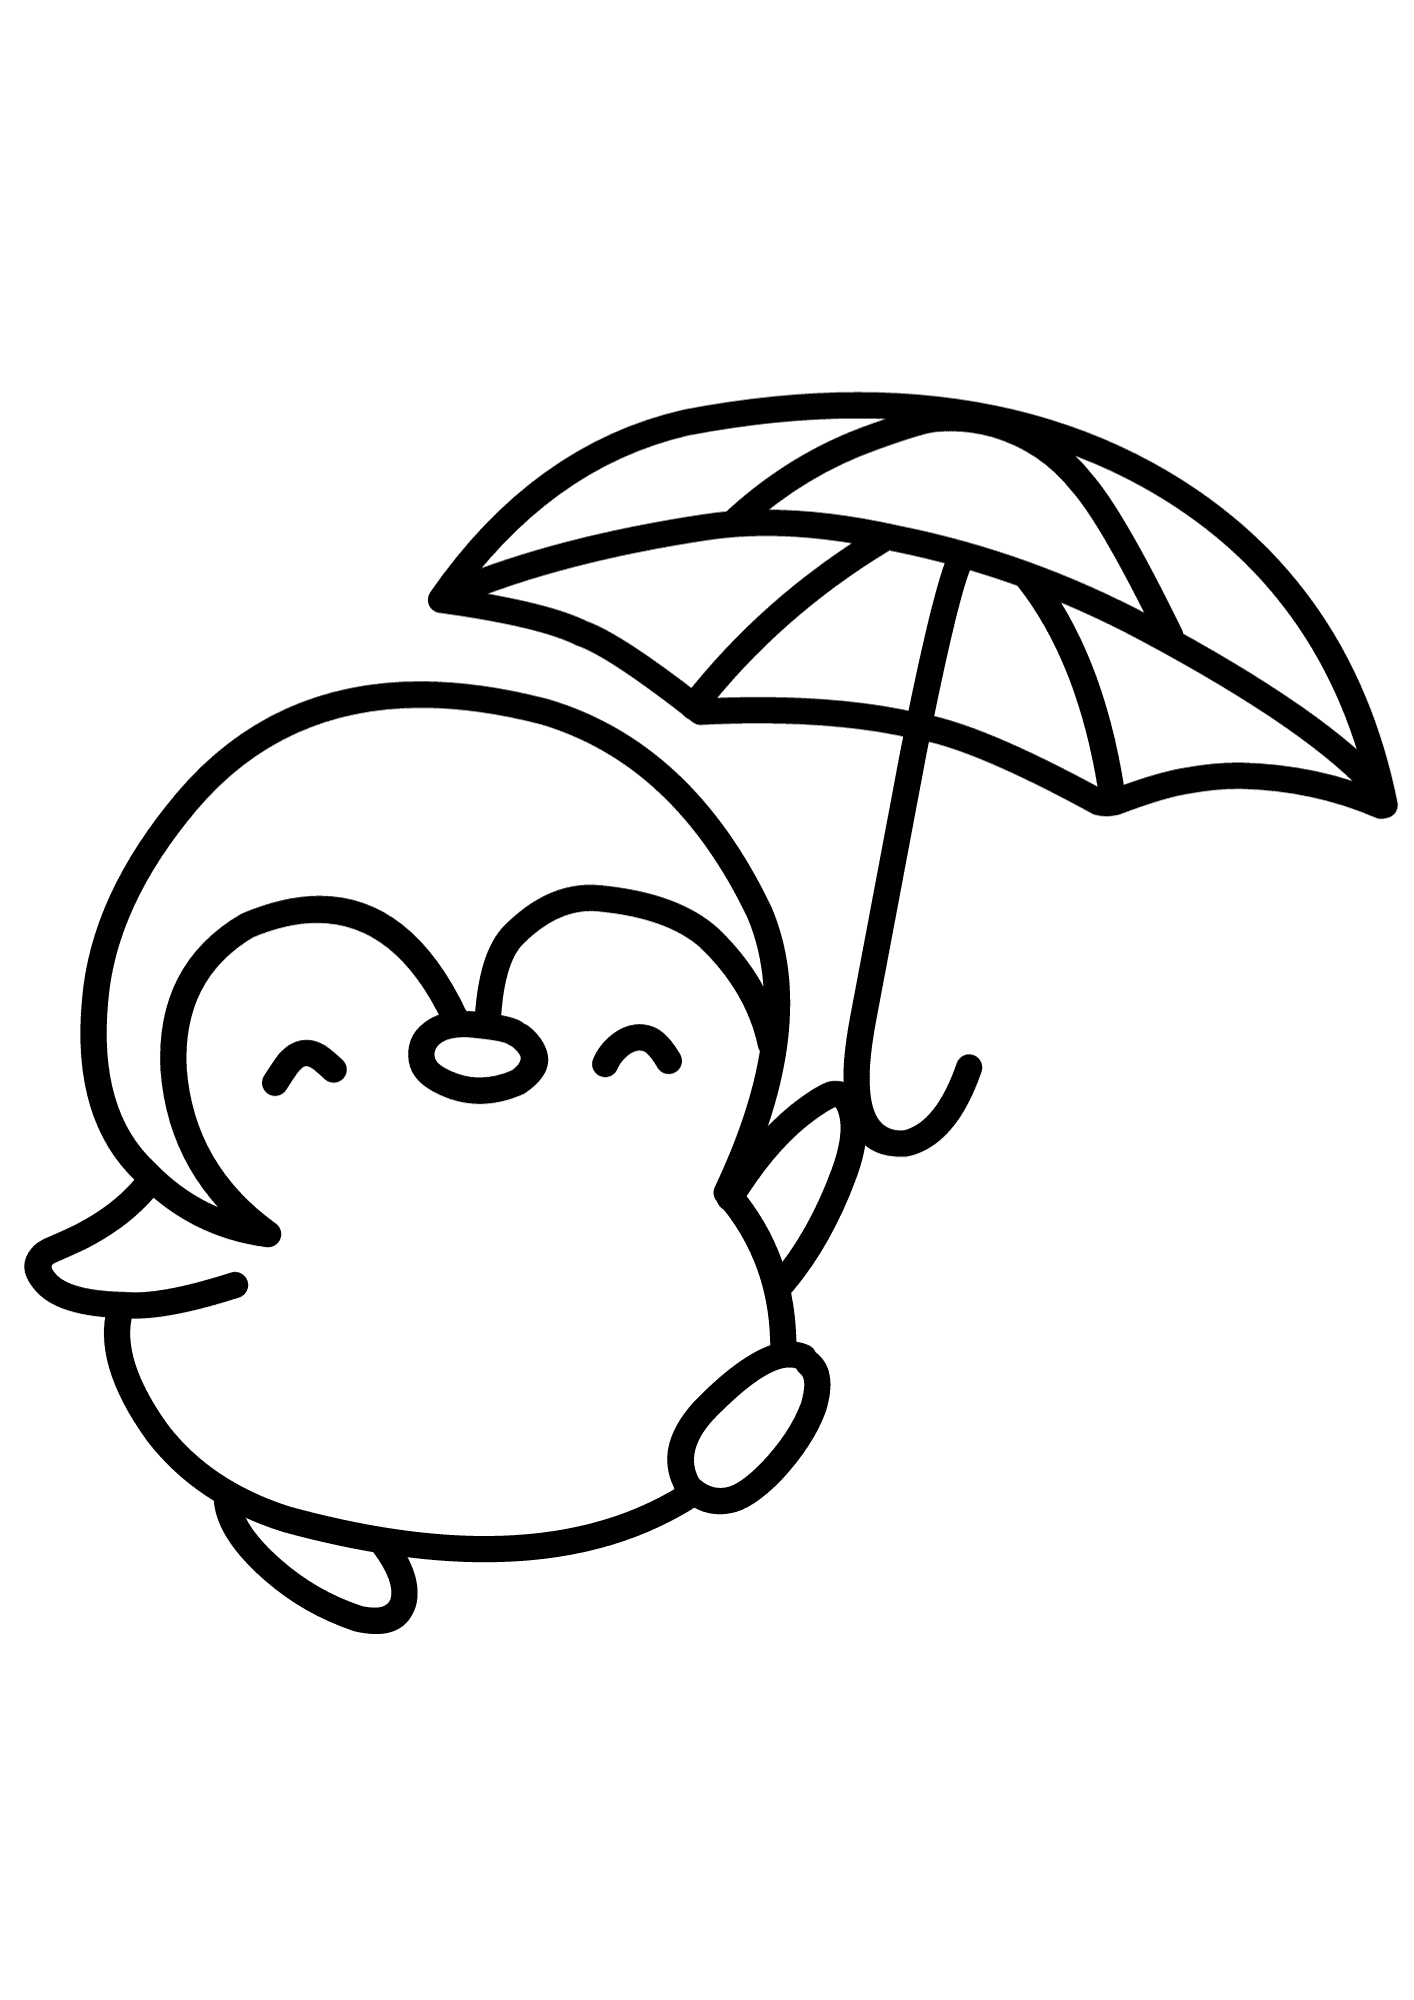 Penguin For Children Coloring Page